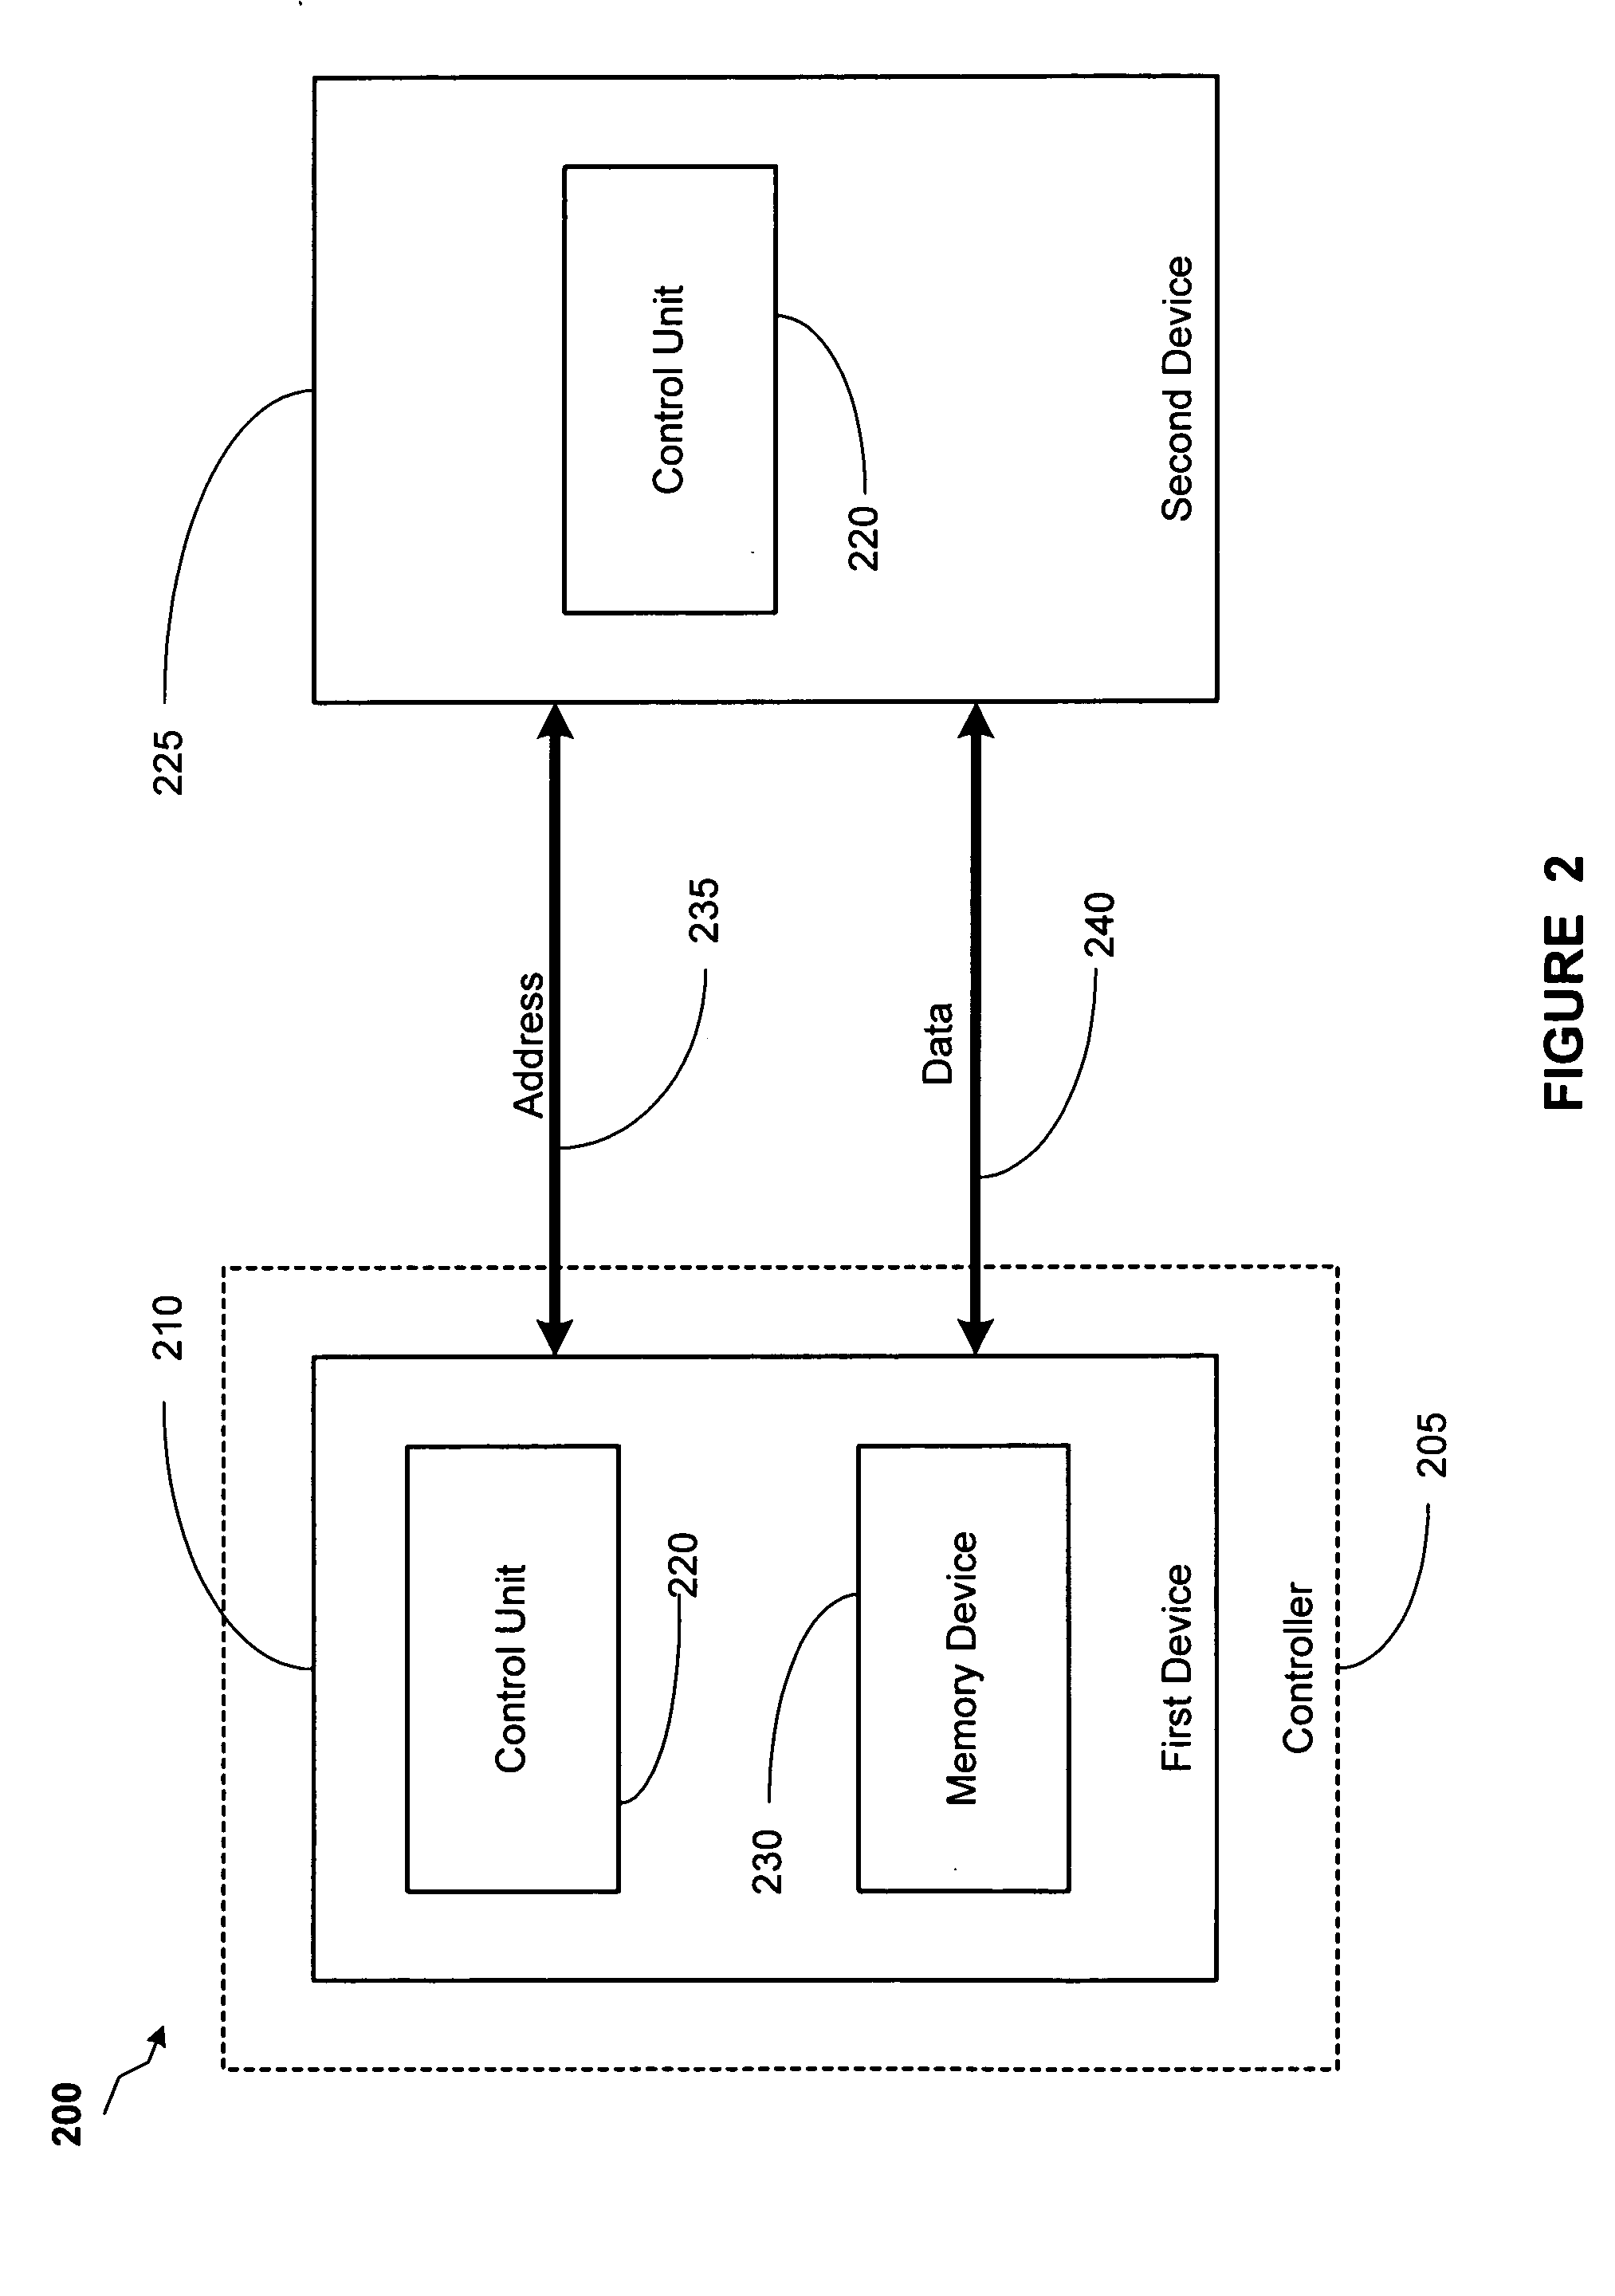 Delay line off-state control with power reduction